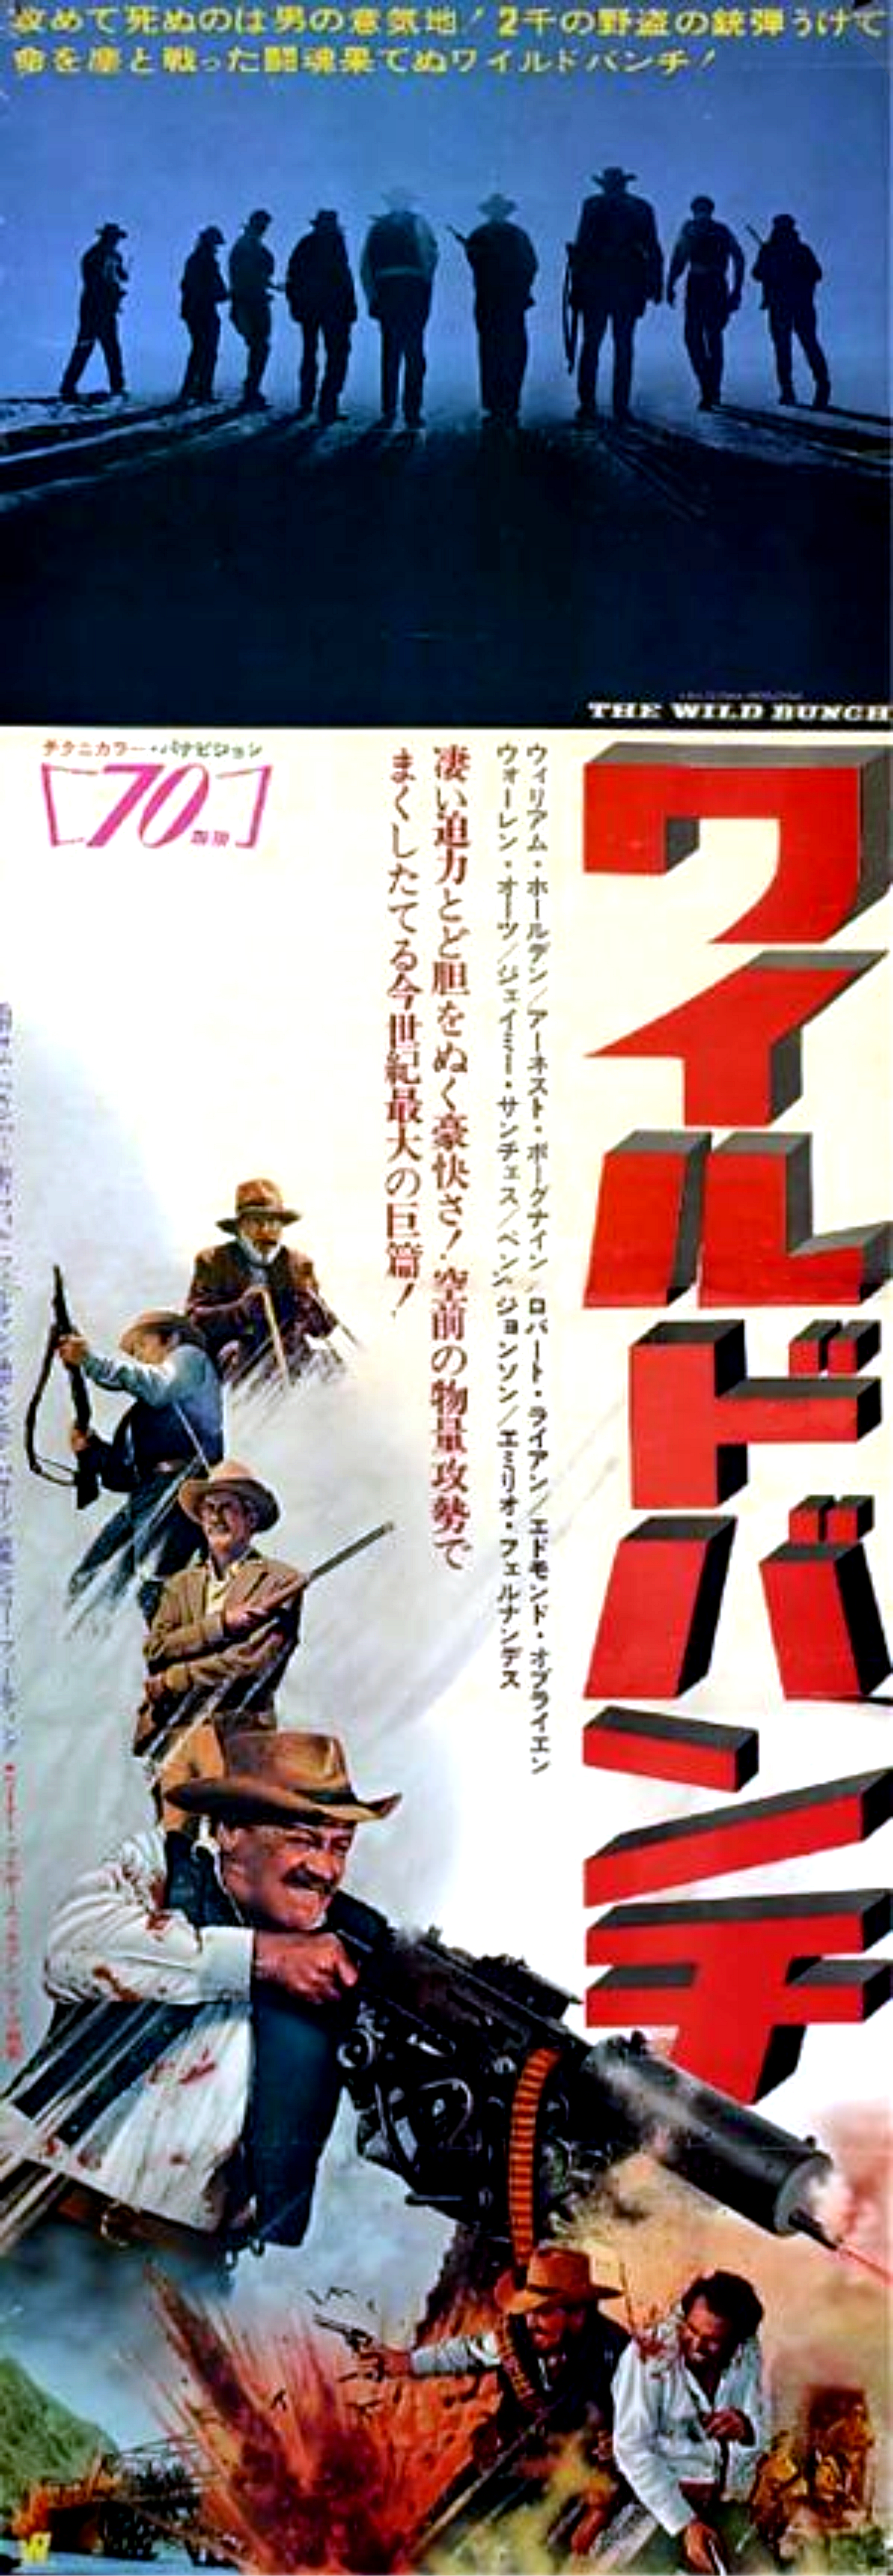 The Wild Bunch poster 19